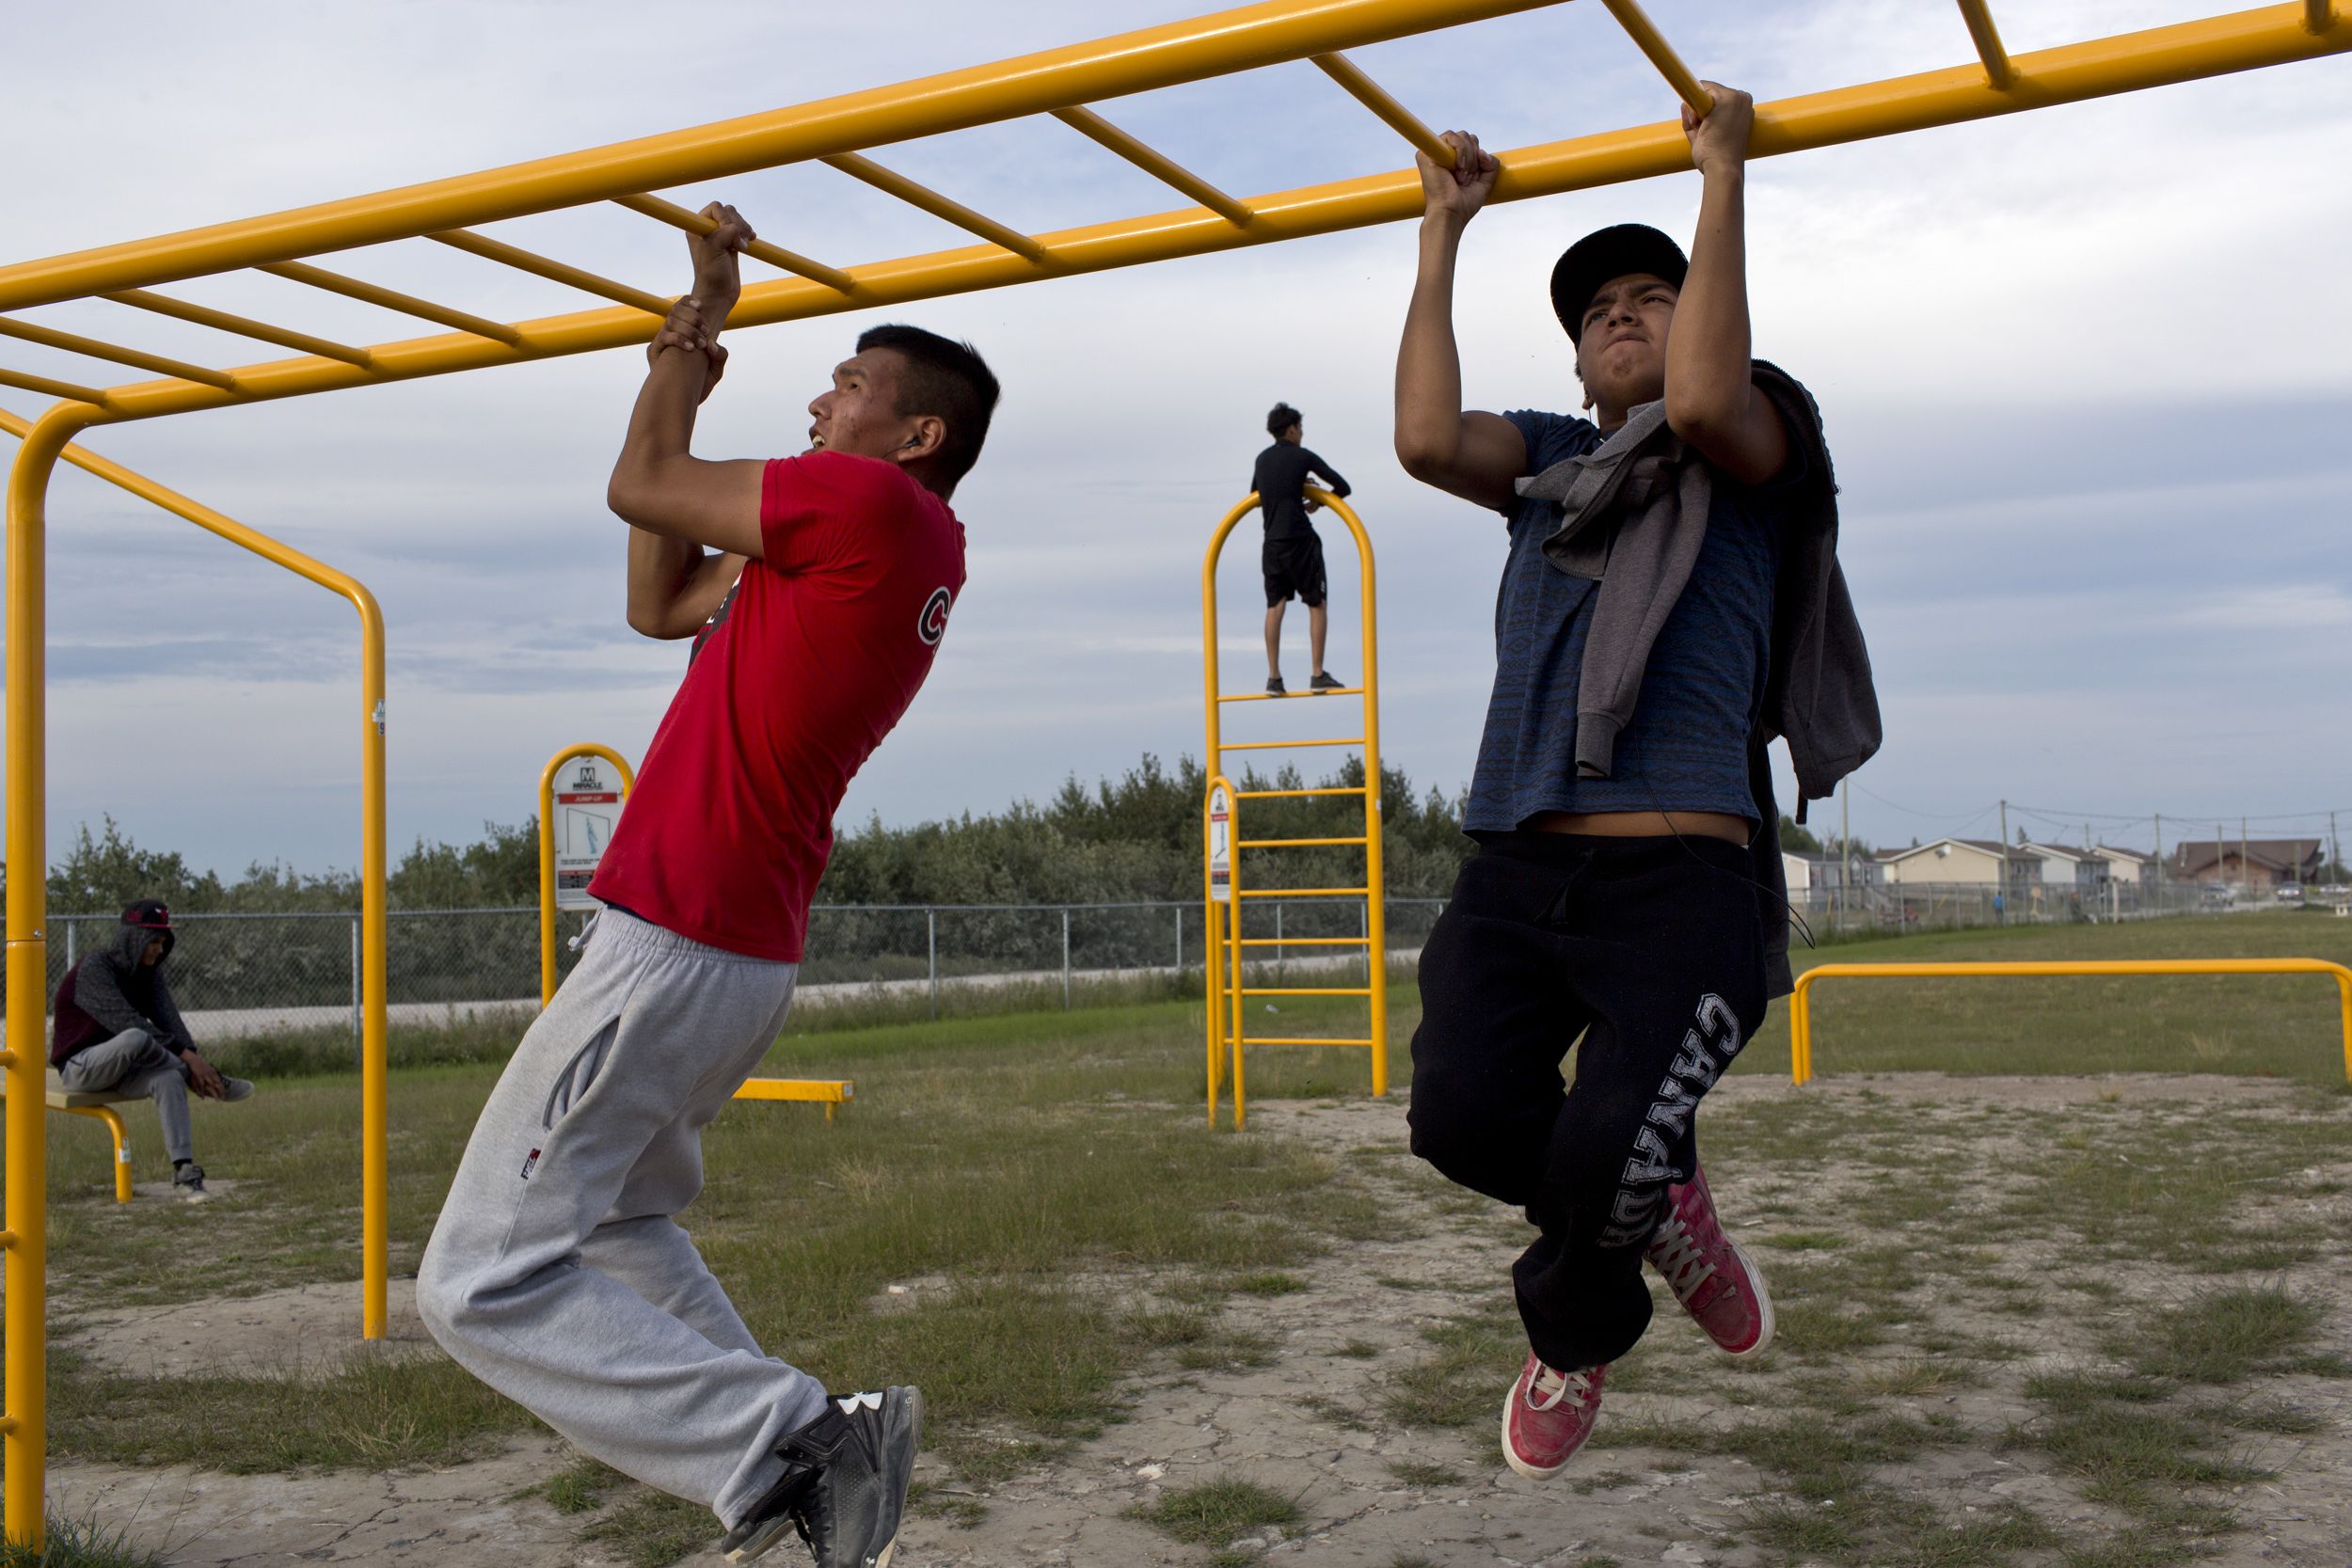 Young men exercise at an outdoor playground. Young men of First Nations are often portrayed negatively in the media. Image by David Maurice Smith/Oculi. Canada, 2016.